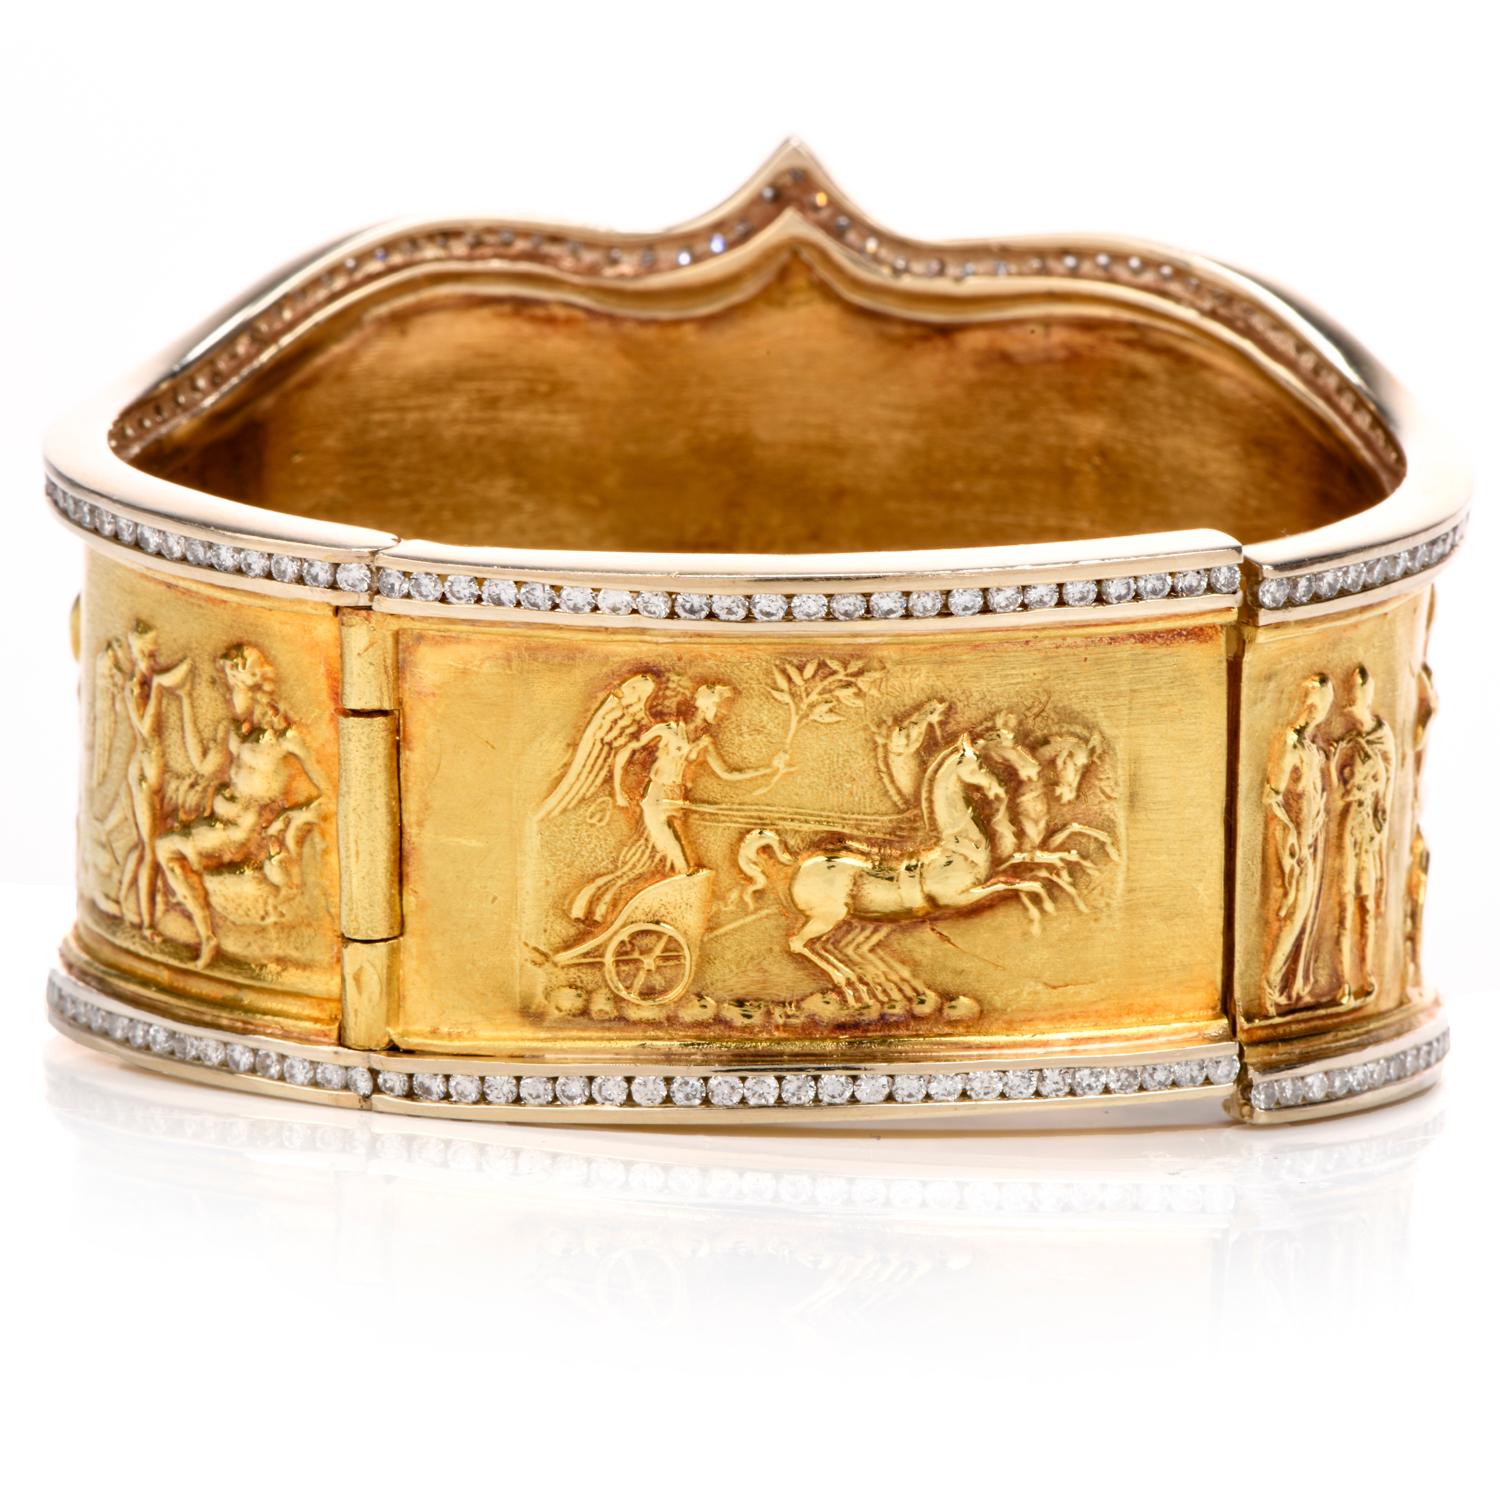 This artistic and bold Ancient Rome inspired bracelet is crafted in solid 18-kara yellow gold, weighing 137.8 grams and measuring up to 6.50” around the wrist x 43mm wide (max). Displaying an intricate design of a Roman civilization, with workers,